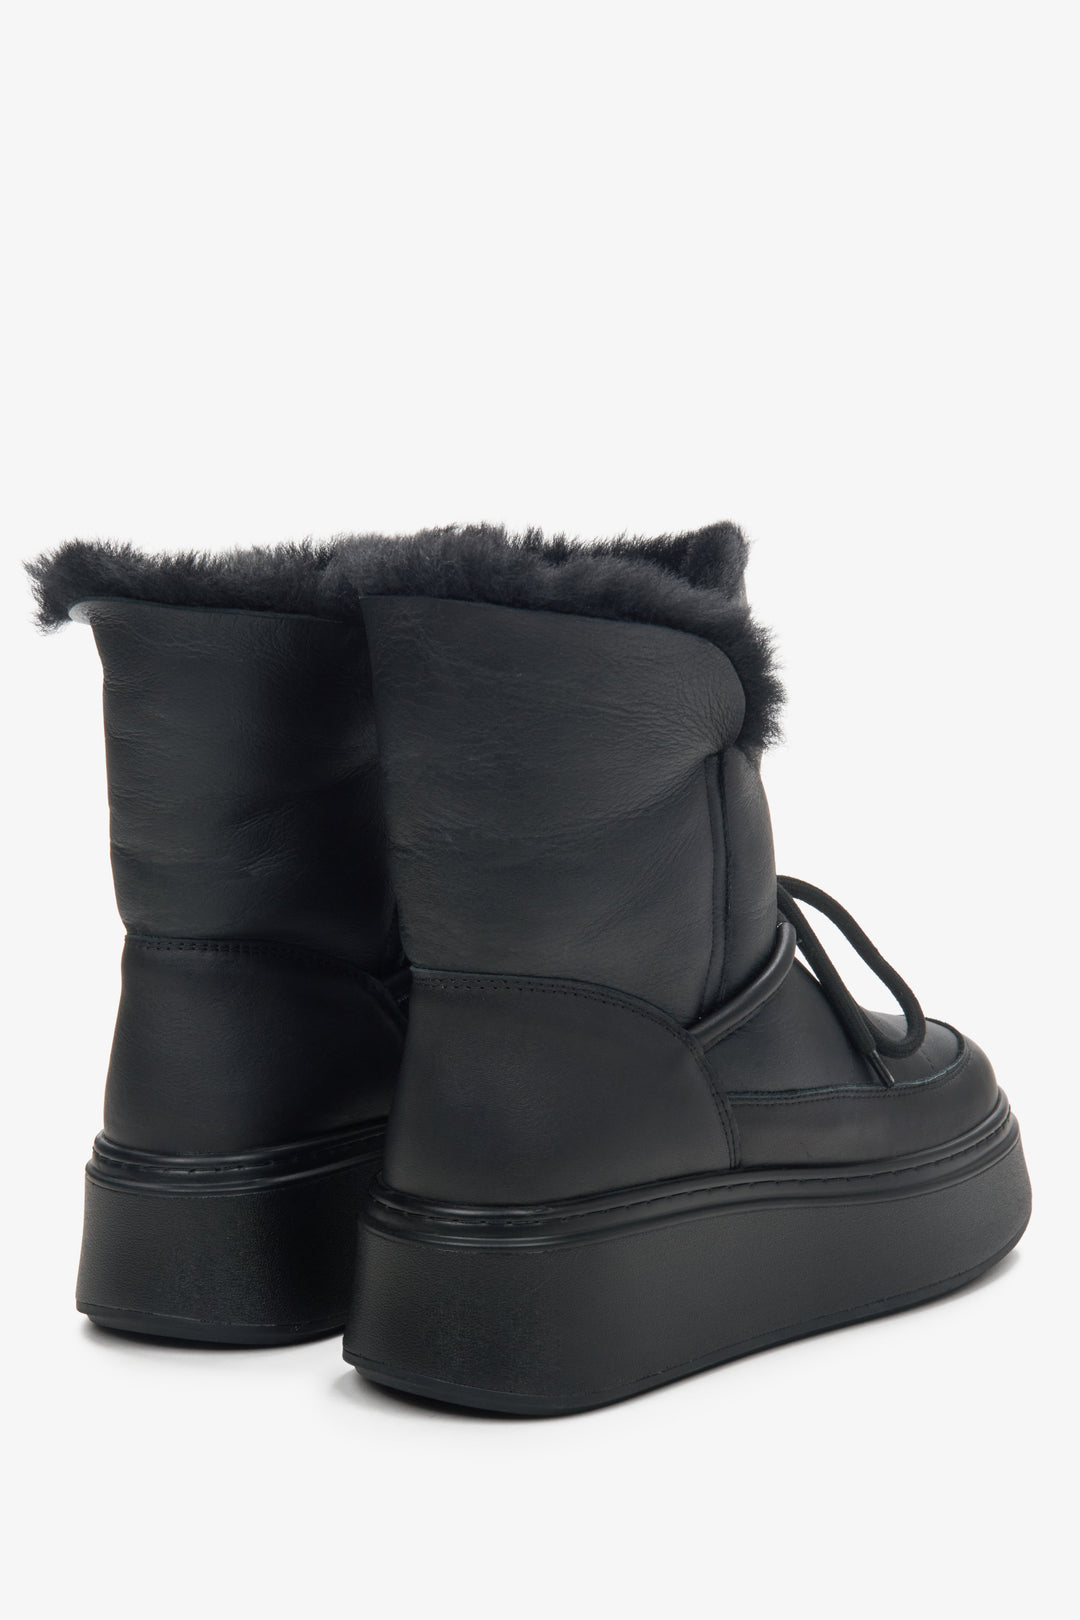 Fur lined snow boots in black Estro - a close-up on sideline and back of the shoes.